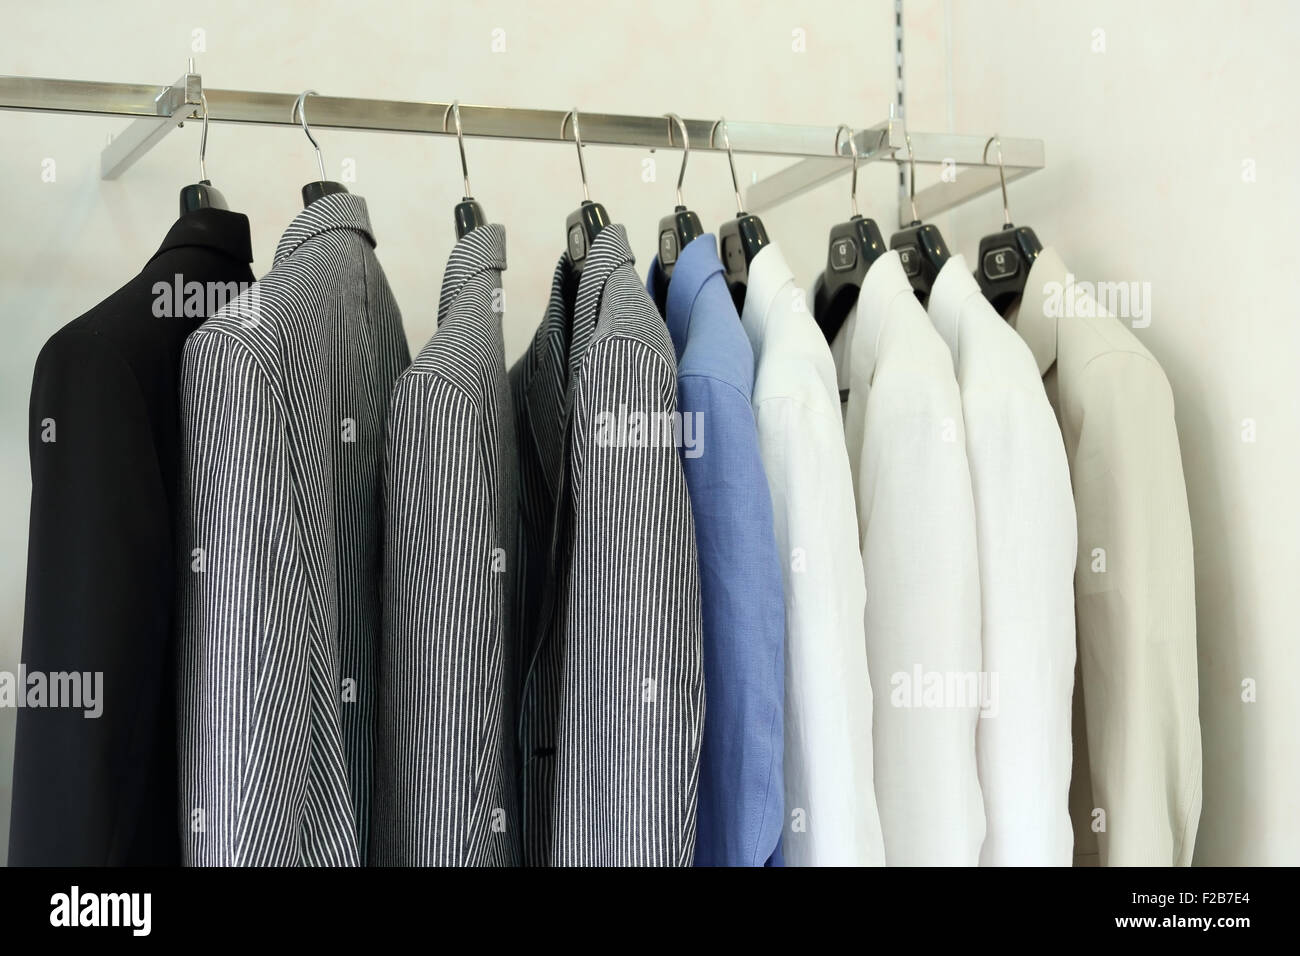 Row of men's suit jackets hanging in a retail shop Stock Photo